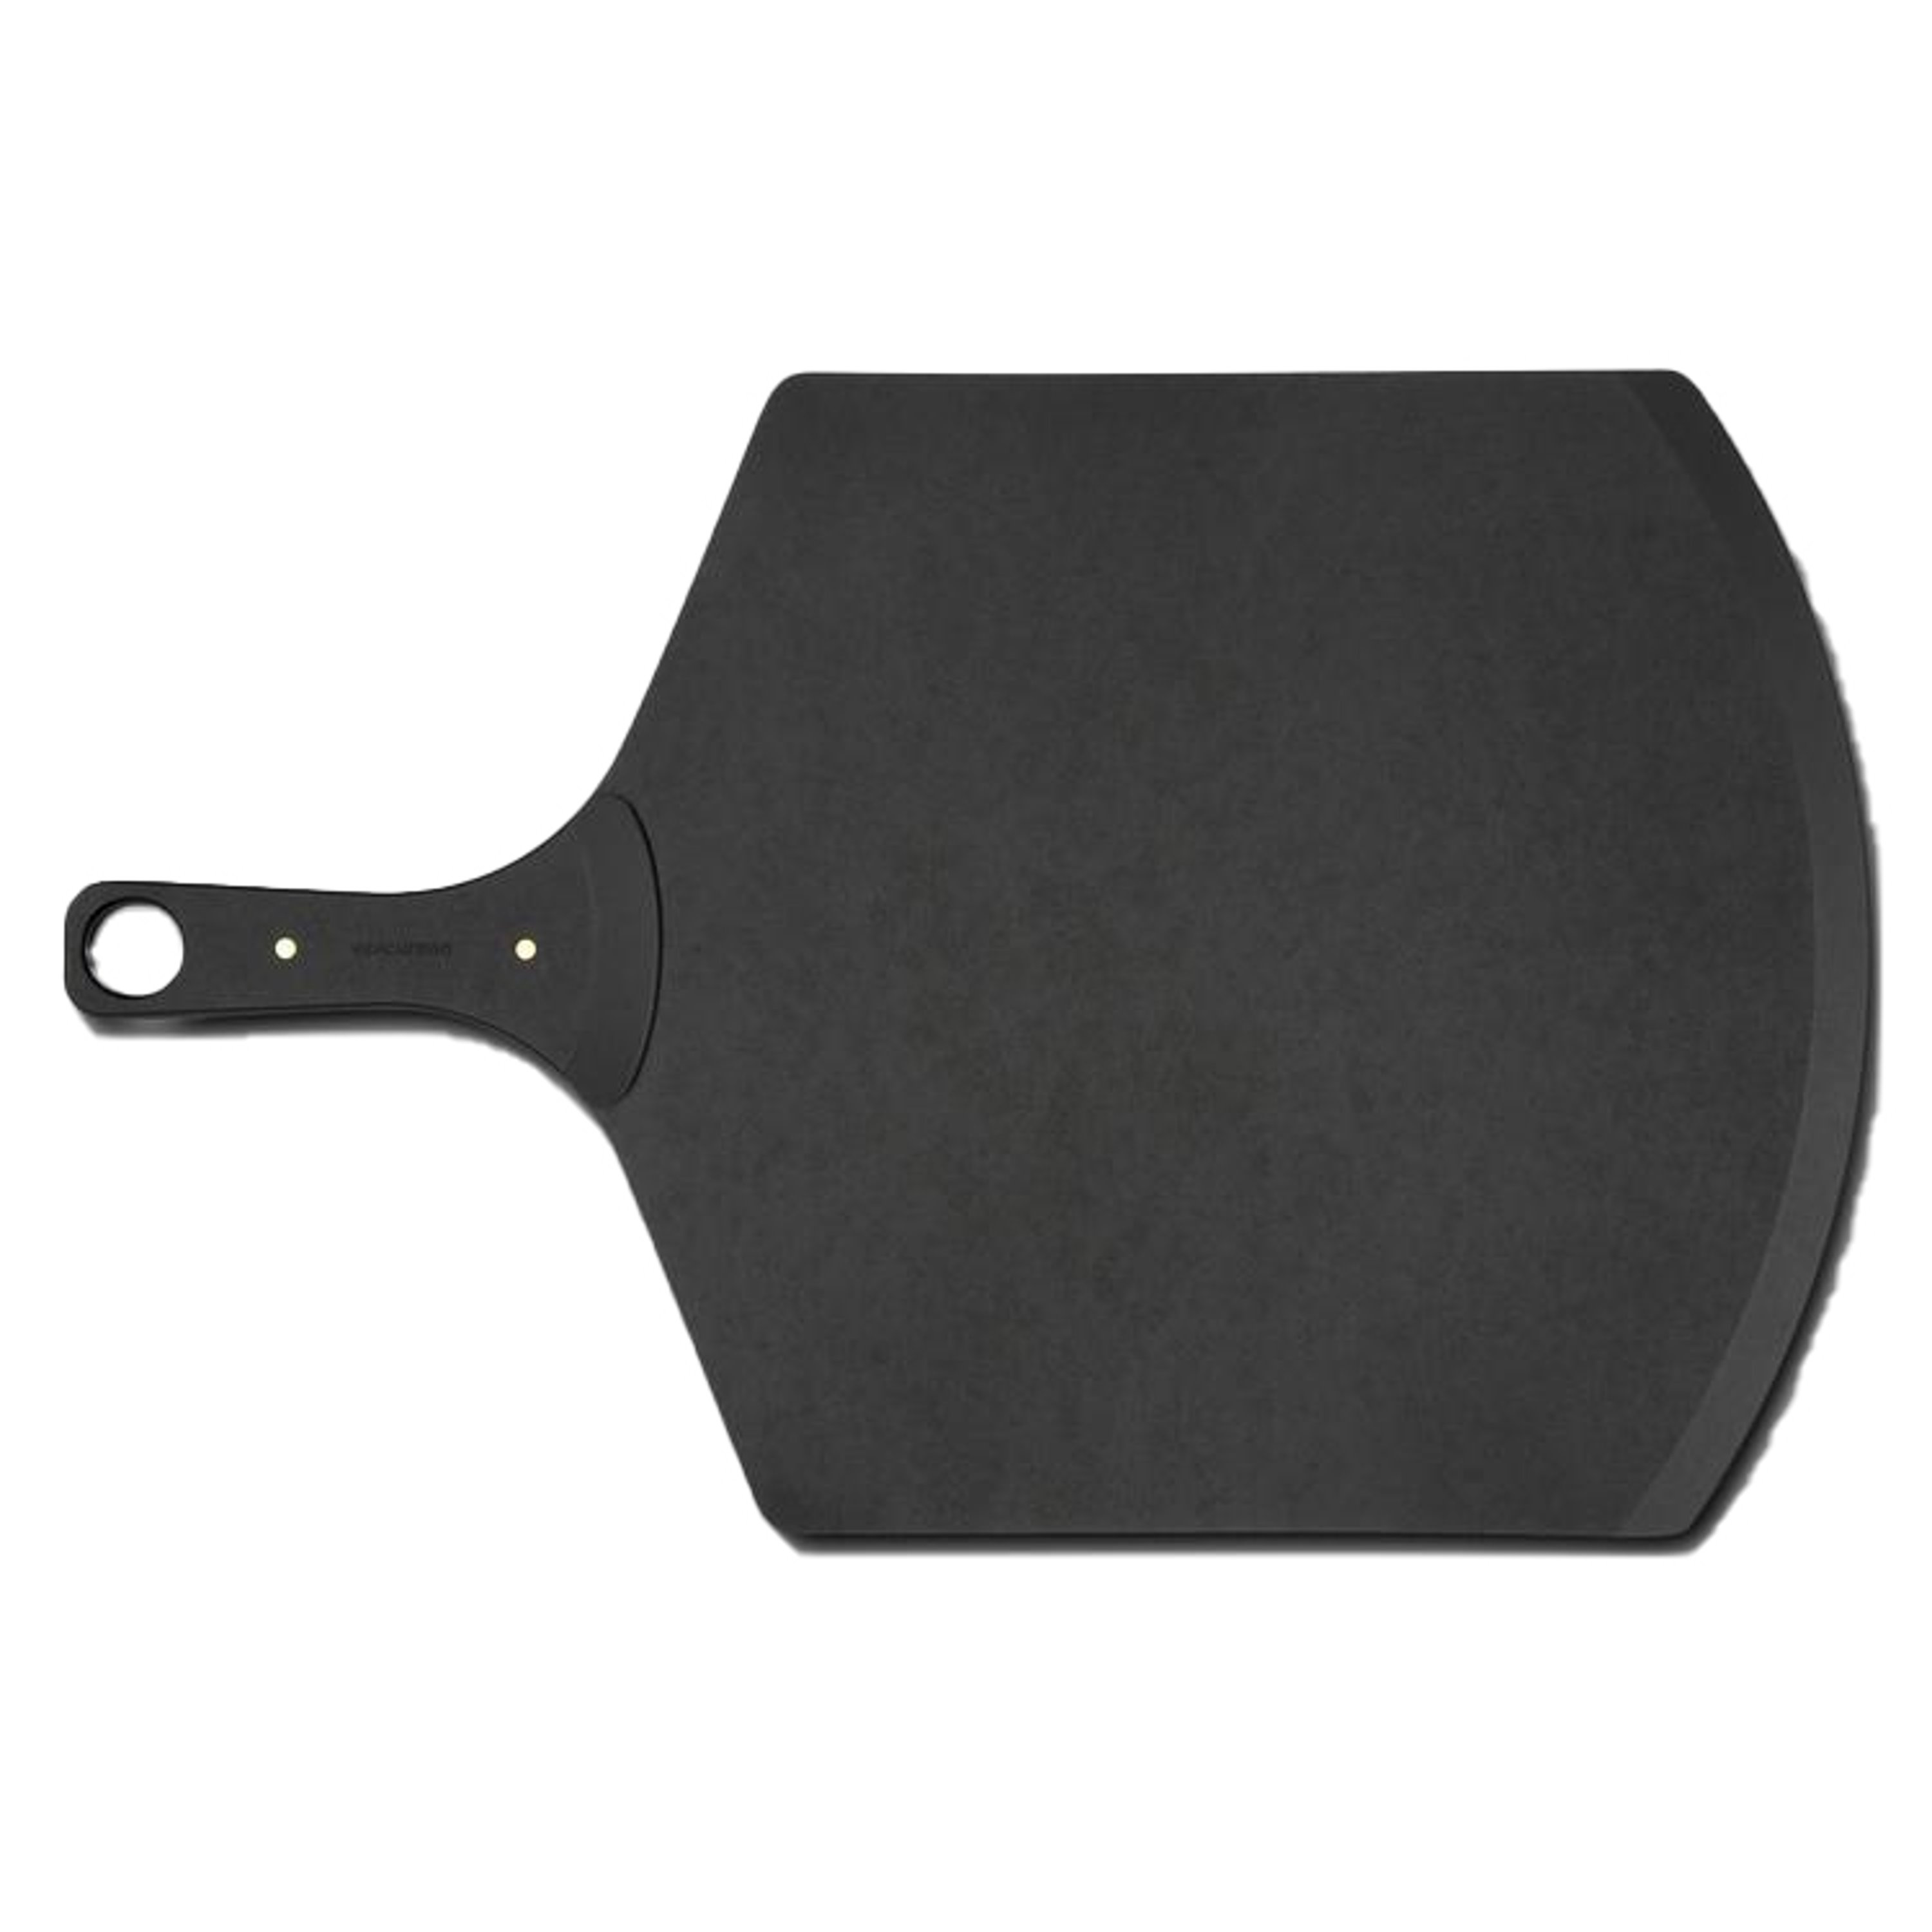 Epicurean Riveted Handled Pizza Peel 21 Inch X 14 Inch